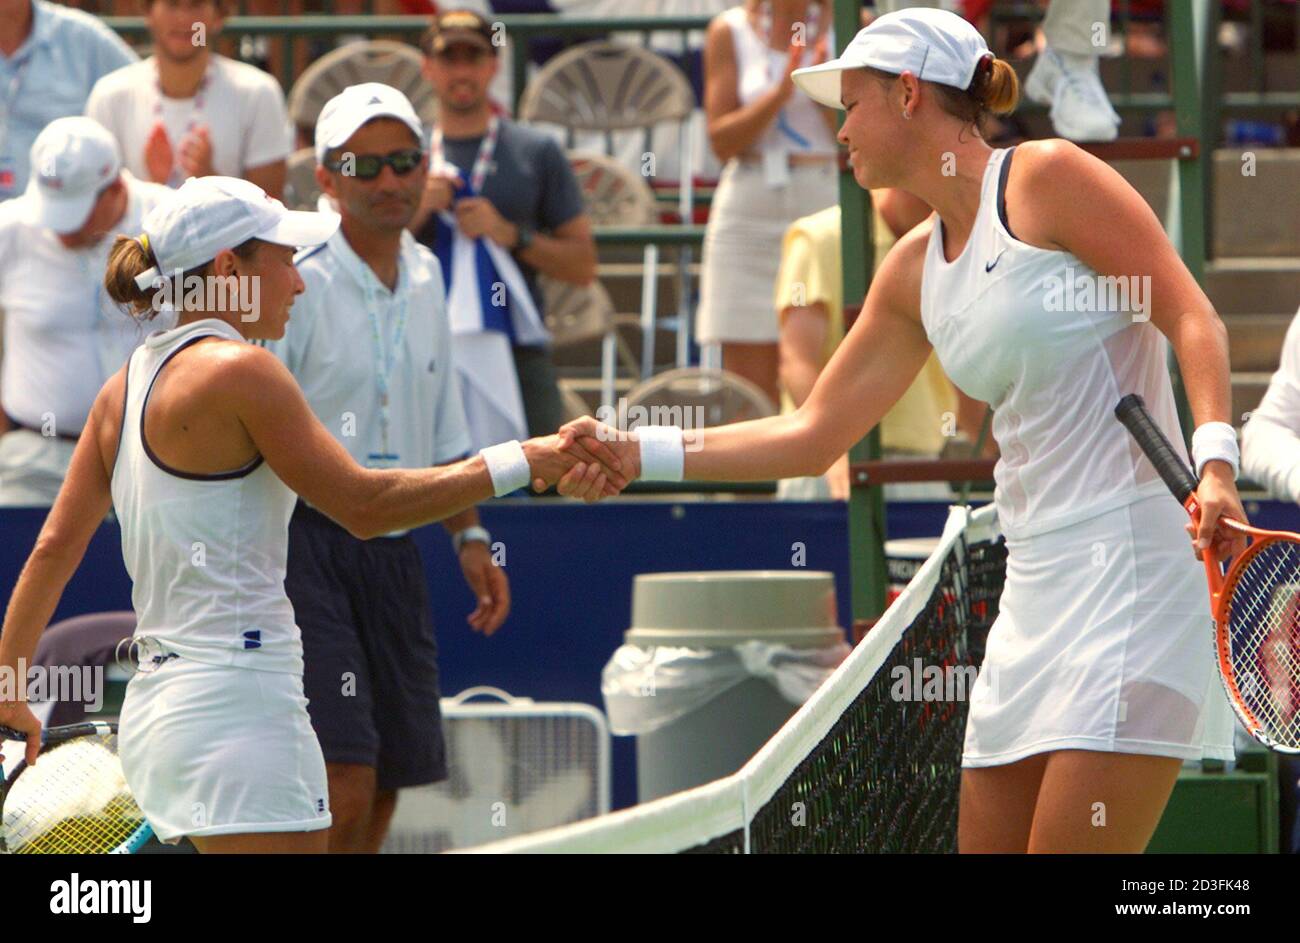 Lindsay Davenport (R) of the United States shakes hands with Anna Smashnova  of Israel following their match in a Fed Cup World Group Playoff in  Springfield, Missouri, July 20, 2002. Davenport, making